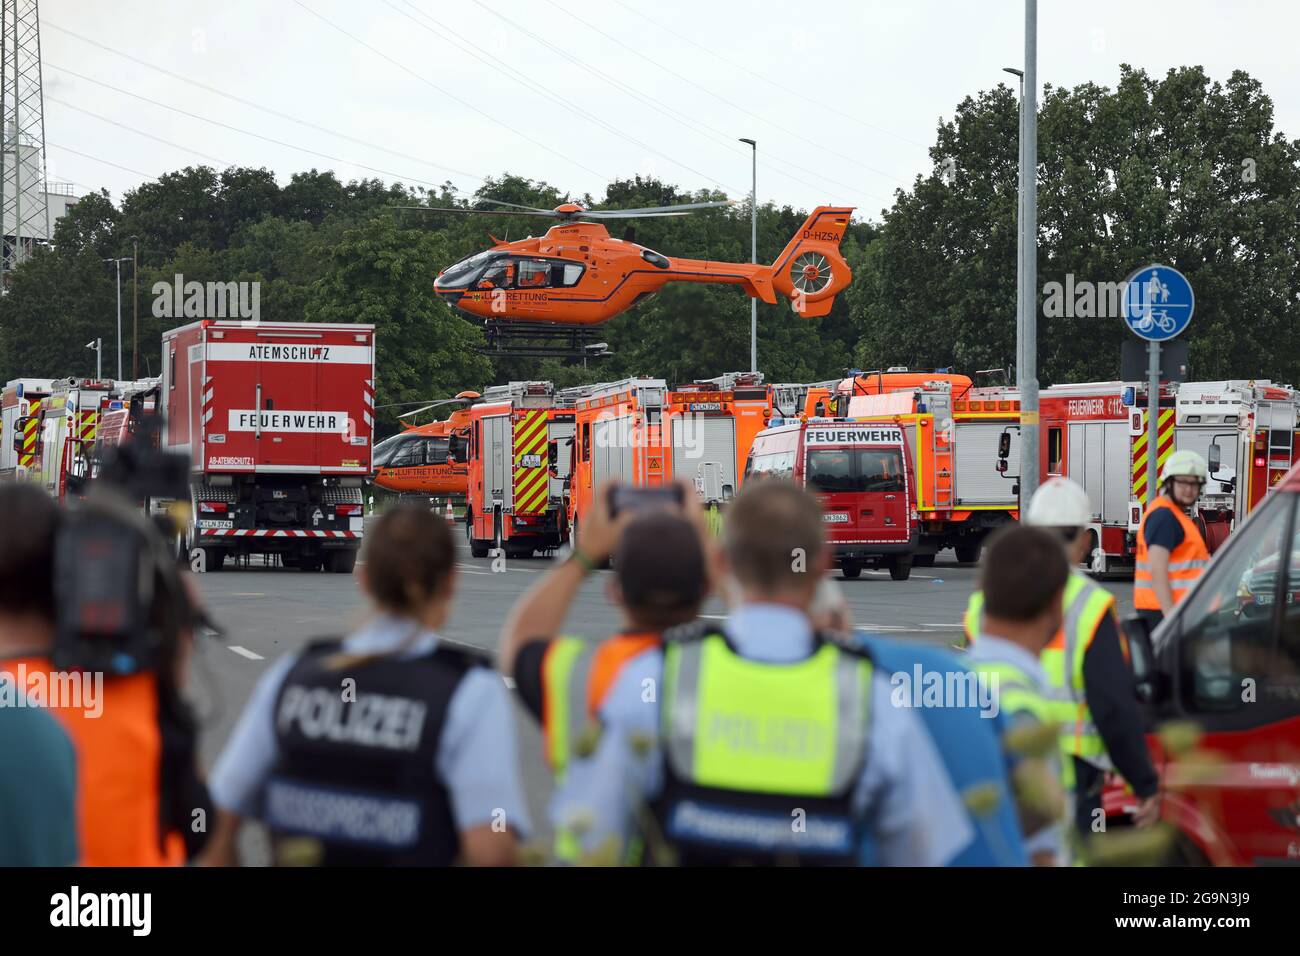 Leverkusen, Germany. 27th July, 2021. A rescue helicopter takes off near the Chempark. According to the Cologne police, several people were injured in an explosion at the Chempark Leverkusen this morning. As the operating company Currenta announced, five employees were still missing after the accident at the waste incineration plant. Credit: Oliver Berg/dpa/Alamy Live News Stock Photo